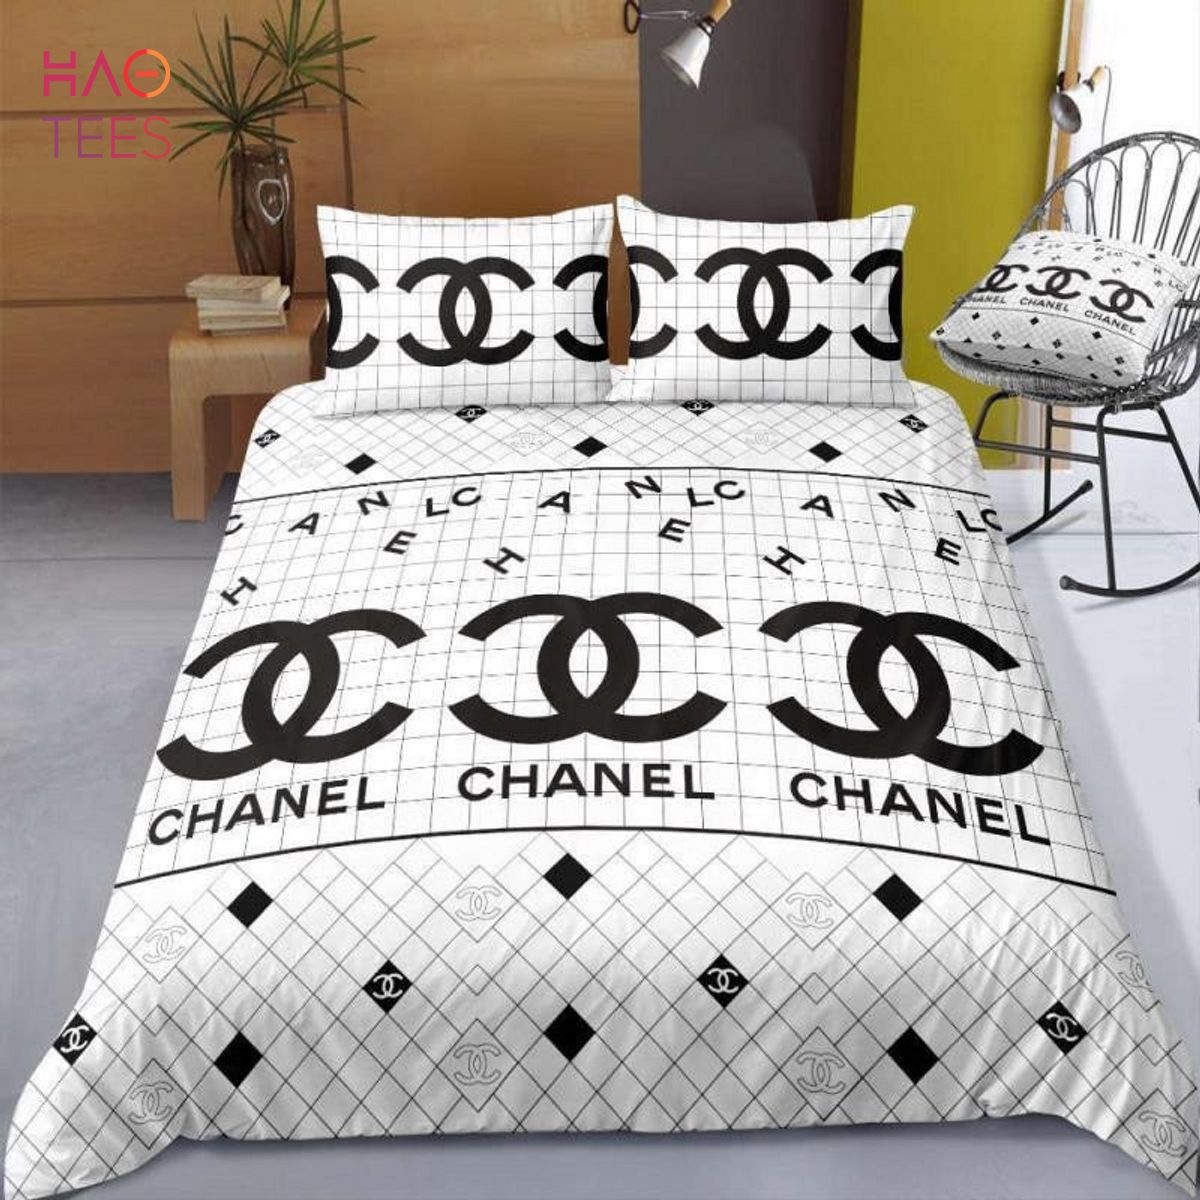 [THE BEST] Chanel Luxury Brand Inspired 3D Personalized Customized Bedding Sets